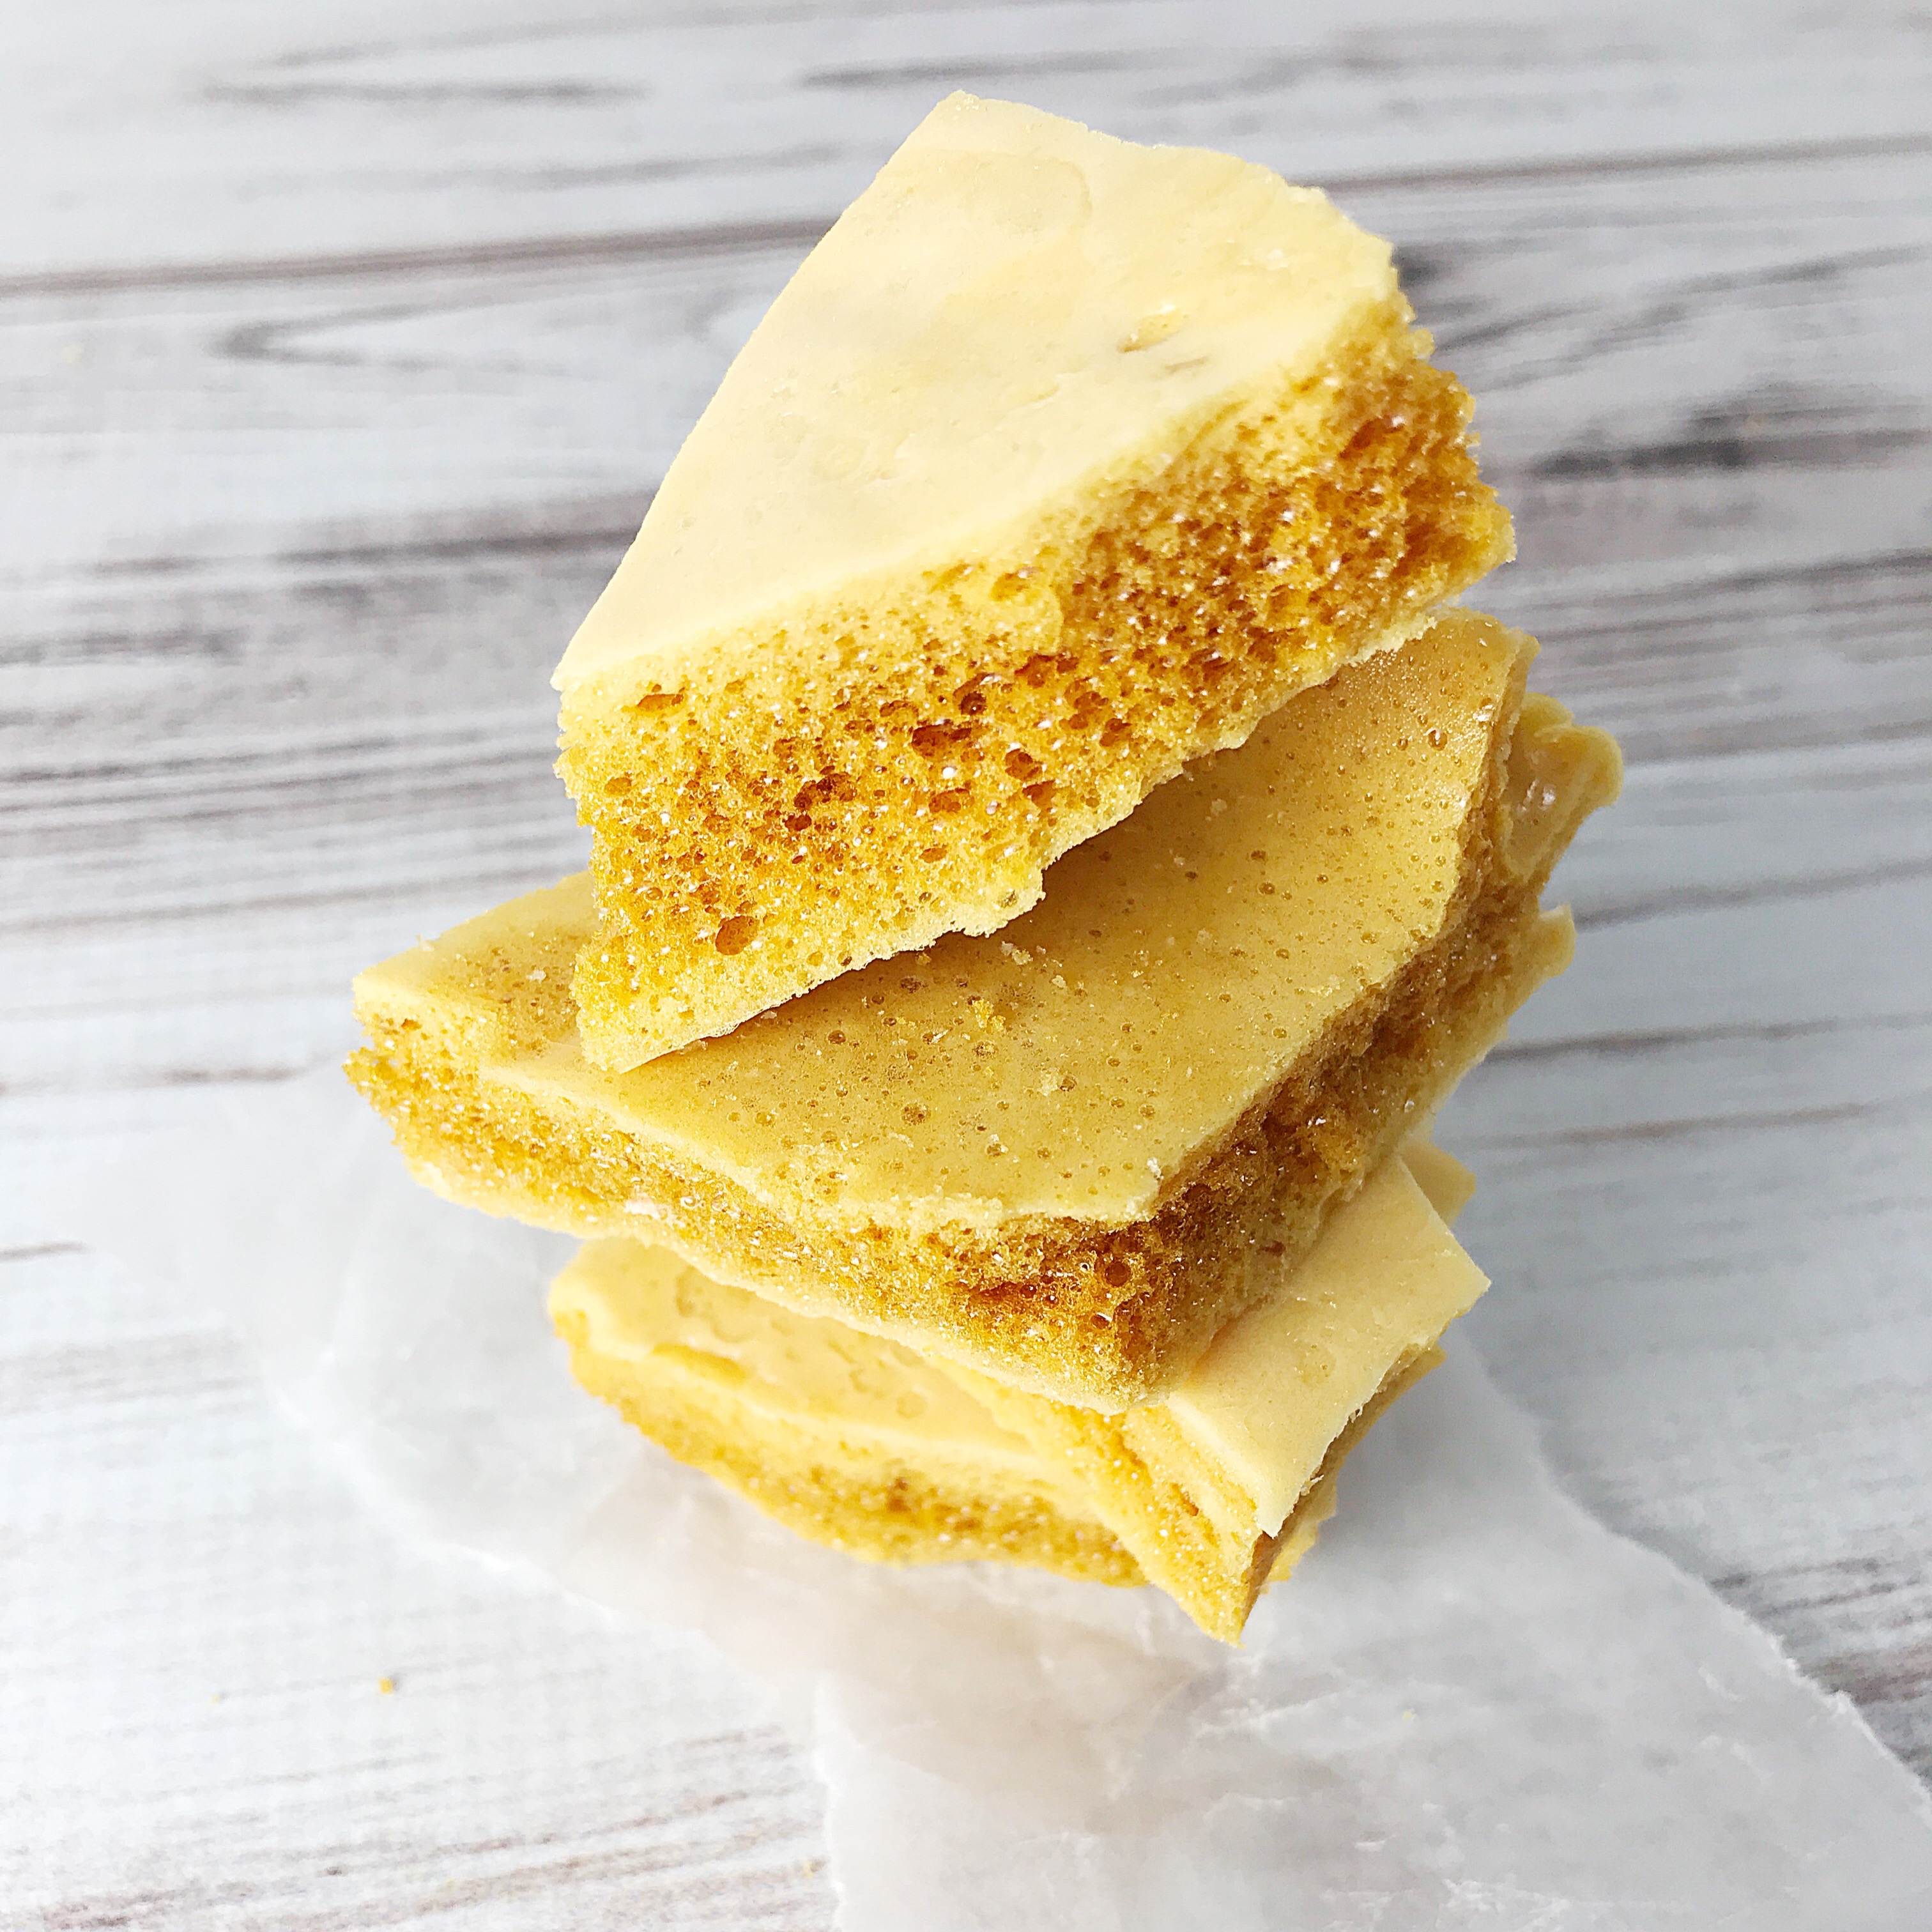 Honeycomb Candy Recipe (Easy, Stovetop)